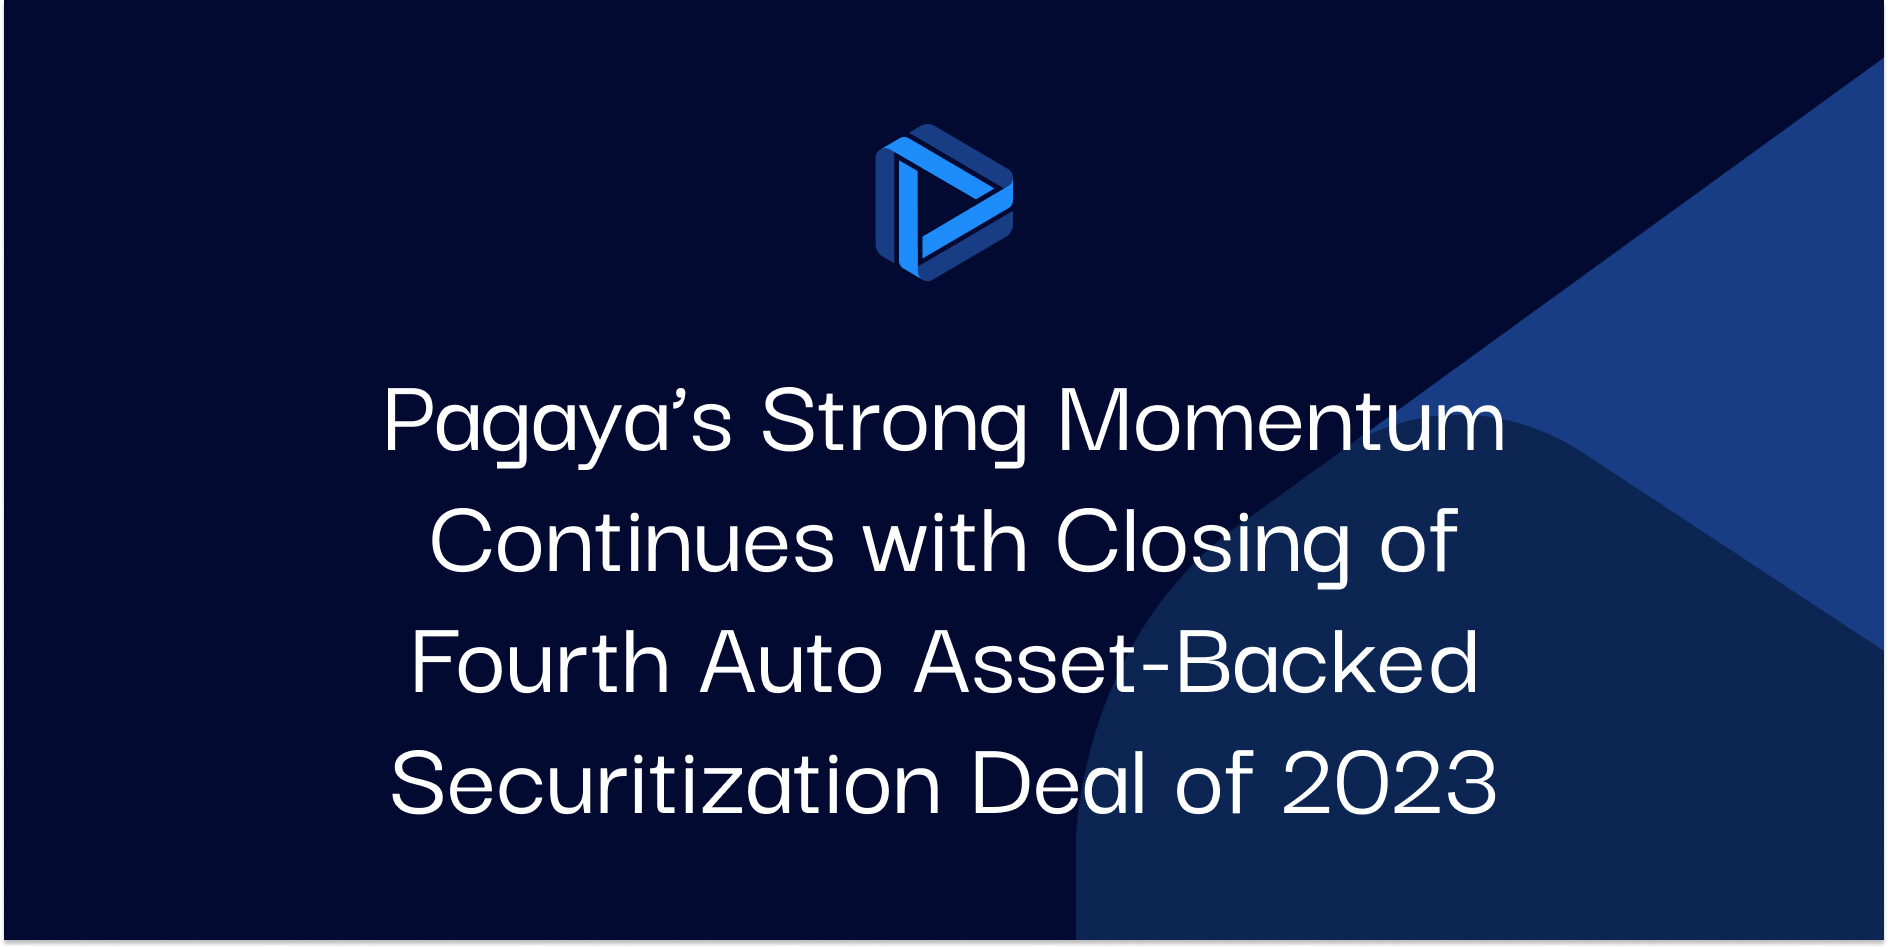 Pagaya’s Strong Momentum Continues with Closing of Fourth Auto Asset-Backed Securitization Deal of 2023